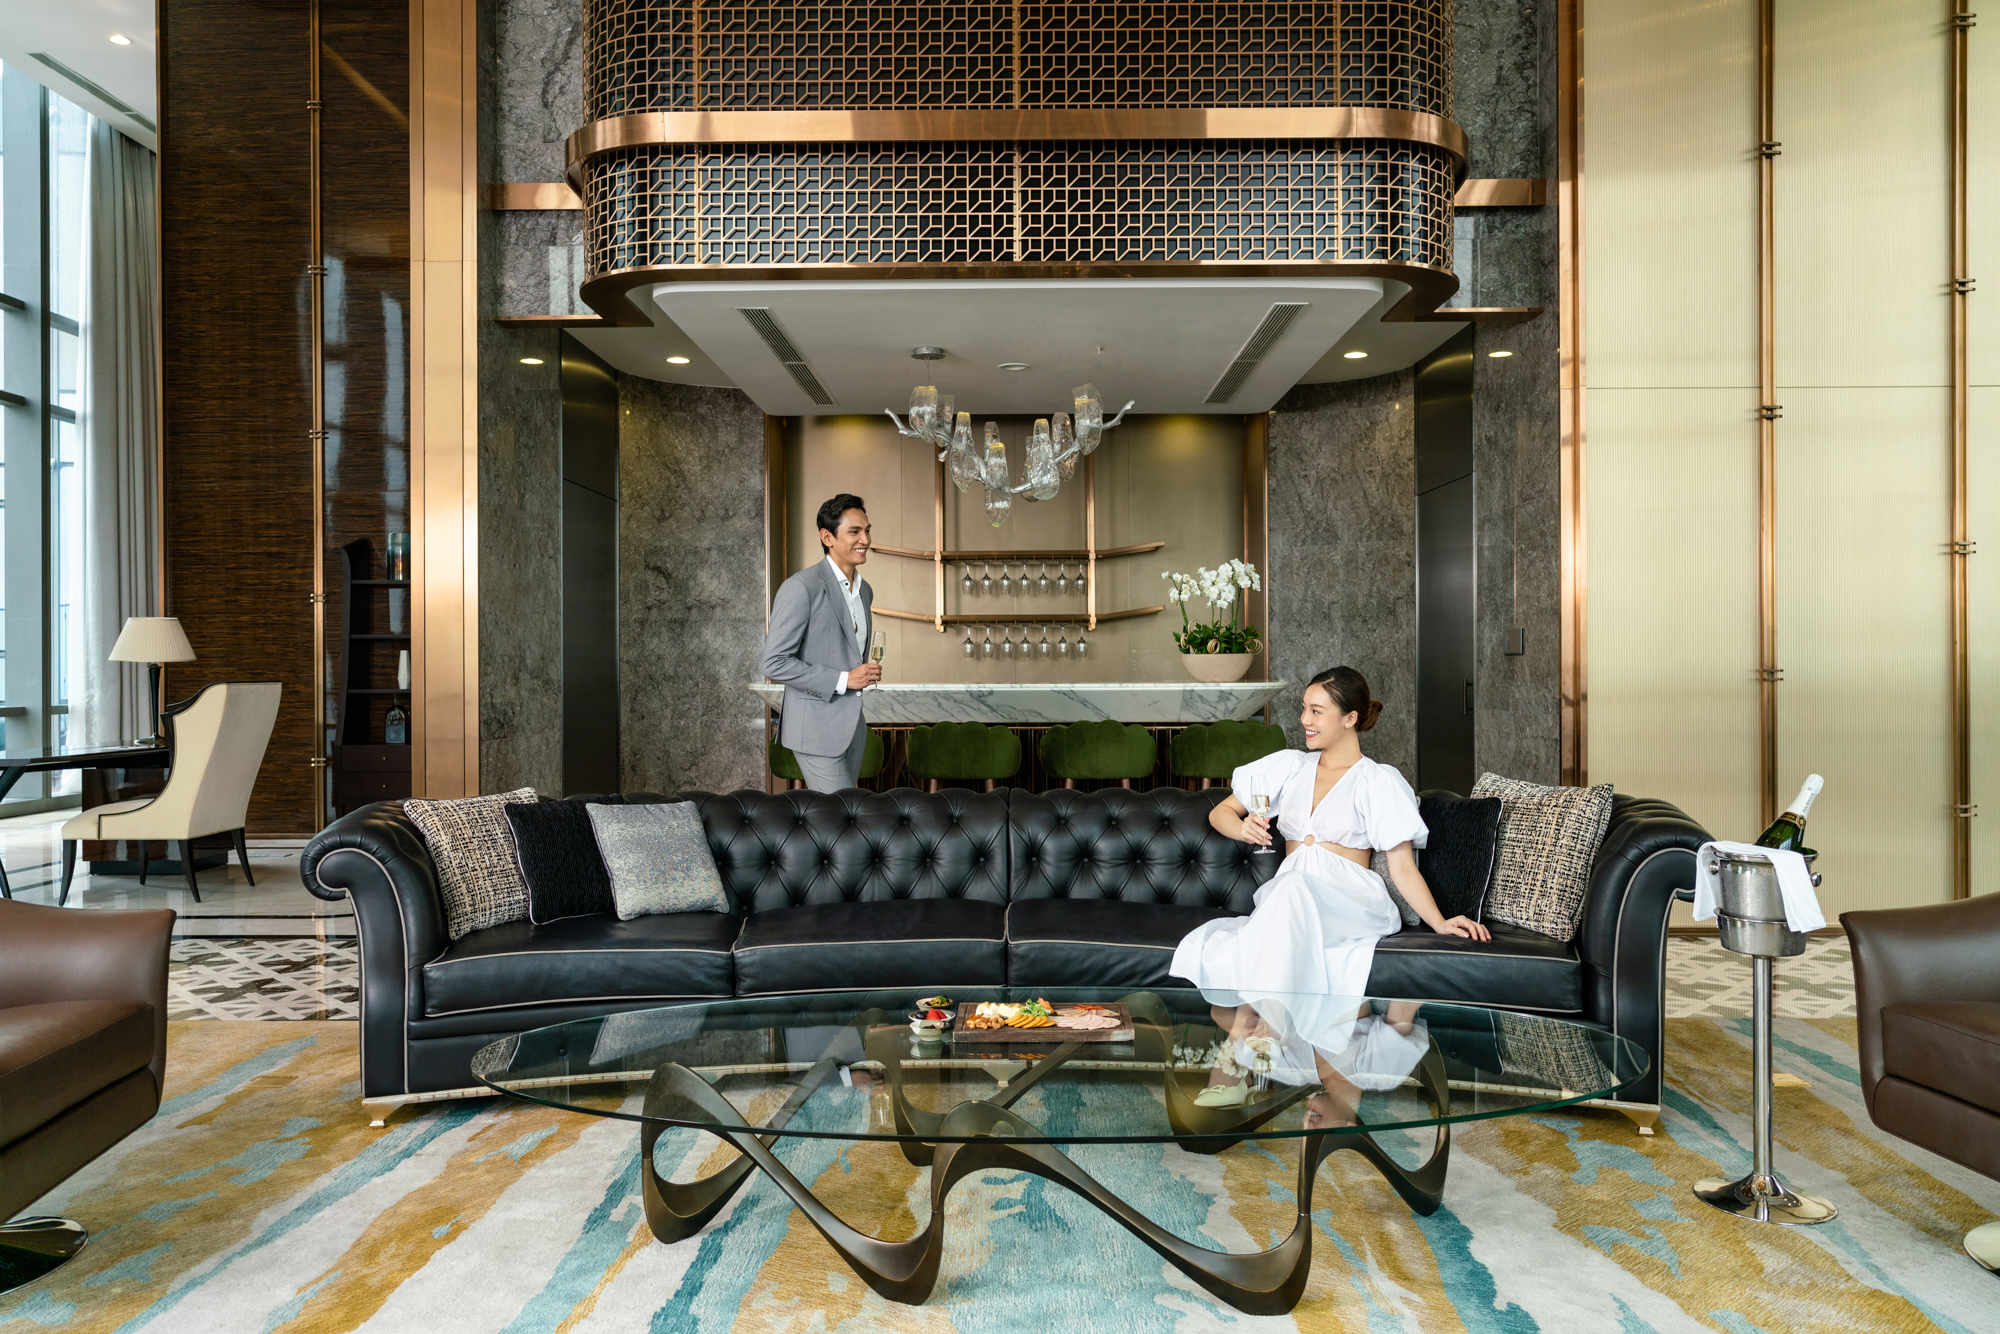 A couple enjoys a luxury stay in a presidential suite at a five star hotel